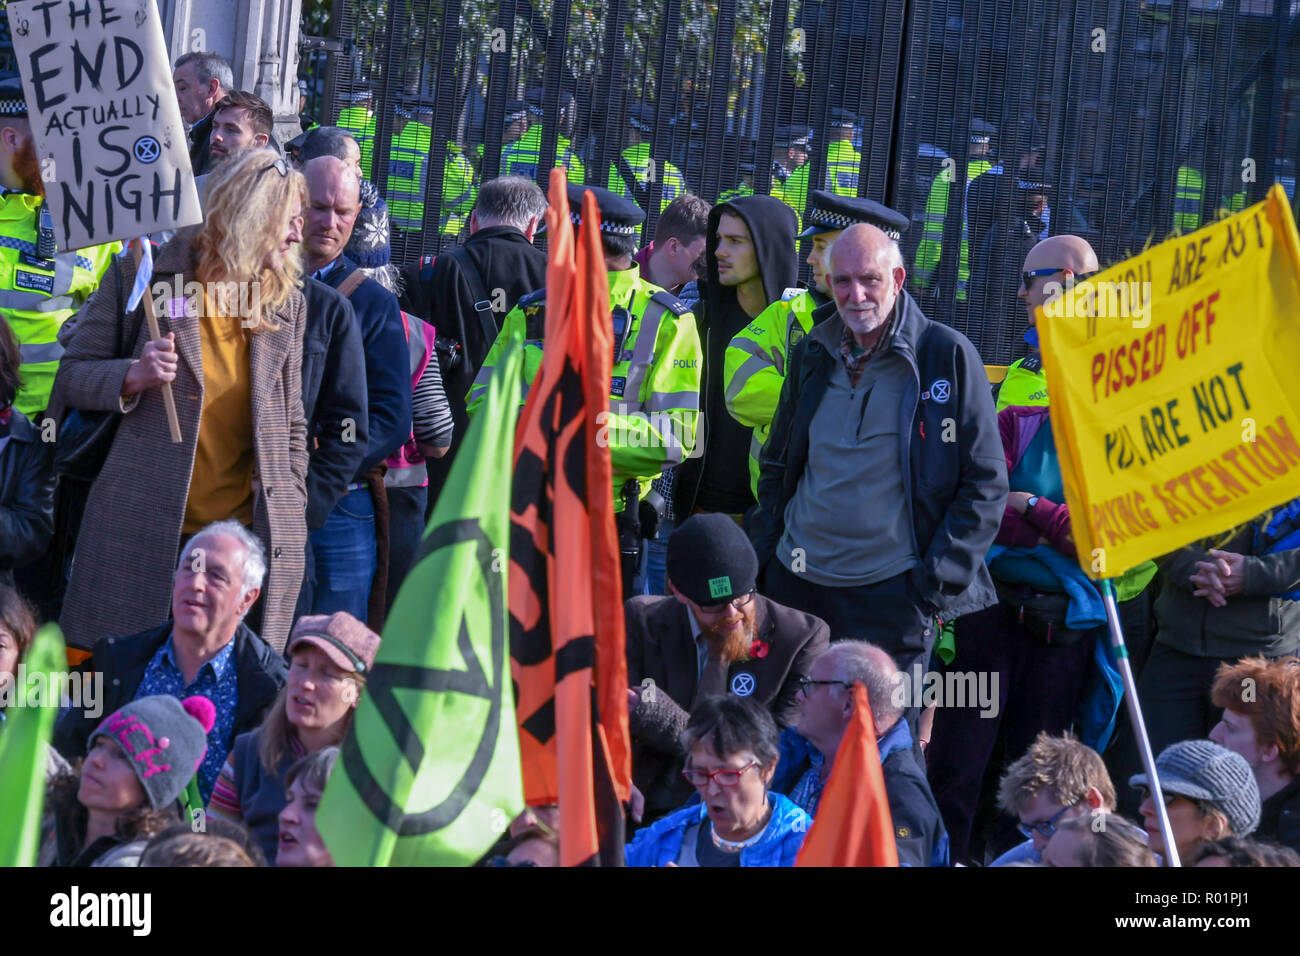 London, UK 31st October 2018  Environmental protesters block the road outside the House of Commons with a call to direct action over environmental issues.such as fracking at a heavily policed demonstration. Credit Ian Davidson/Alamy Live News Stock Photo